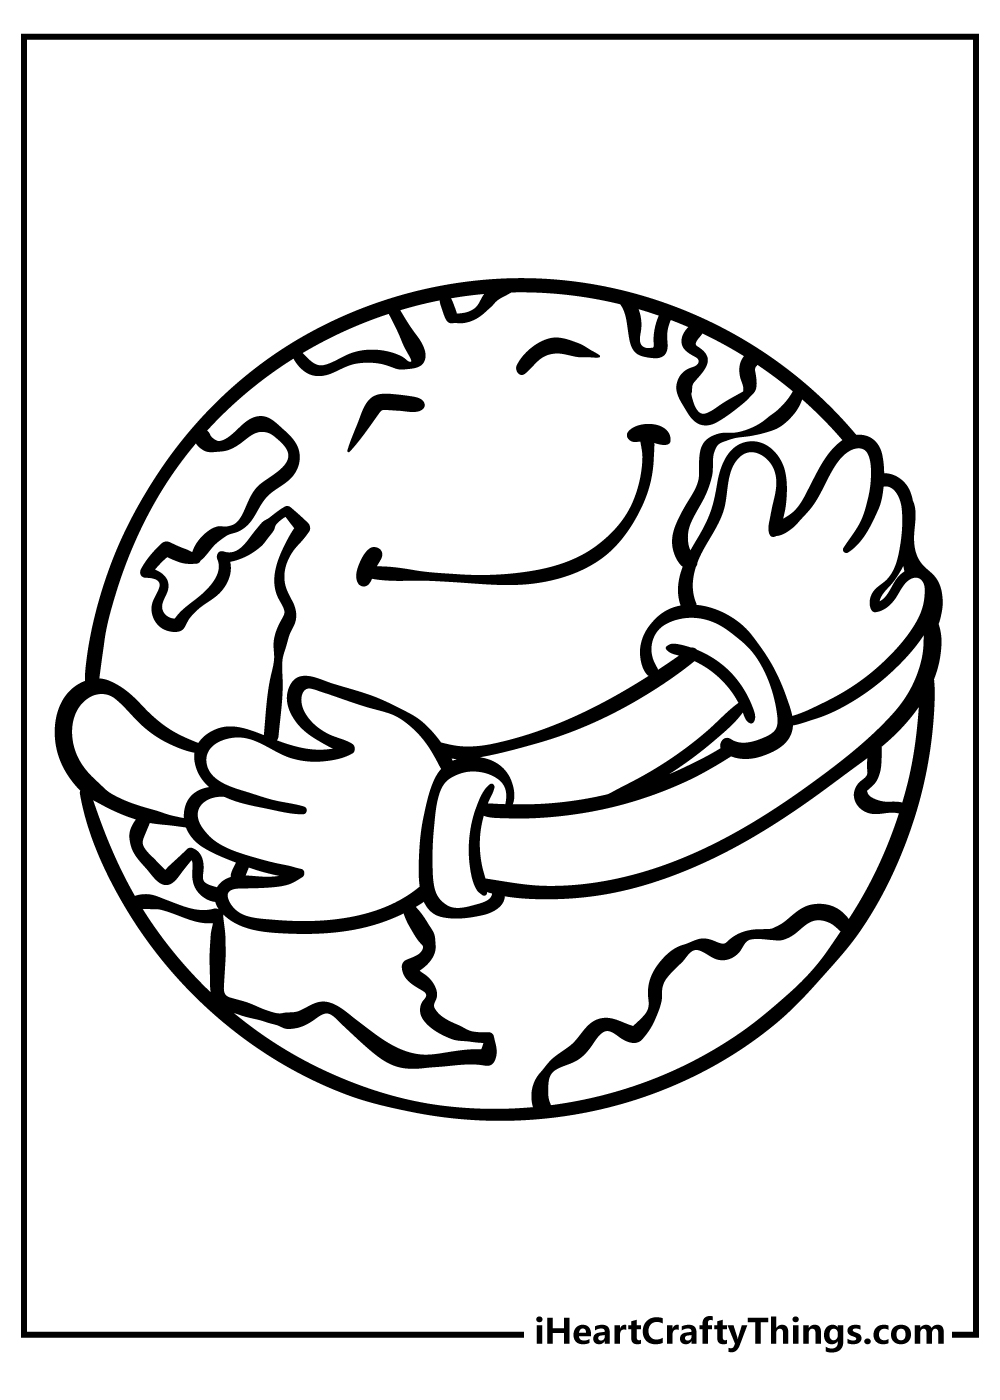 Printable Earth Coloring Pages Updated 18